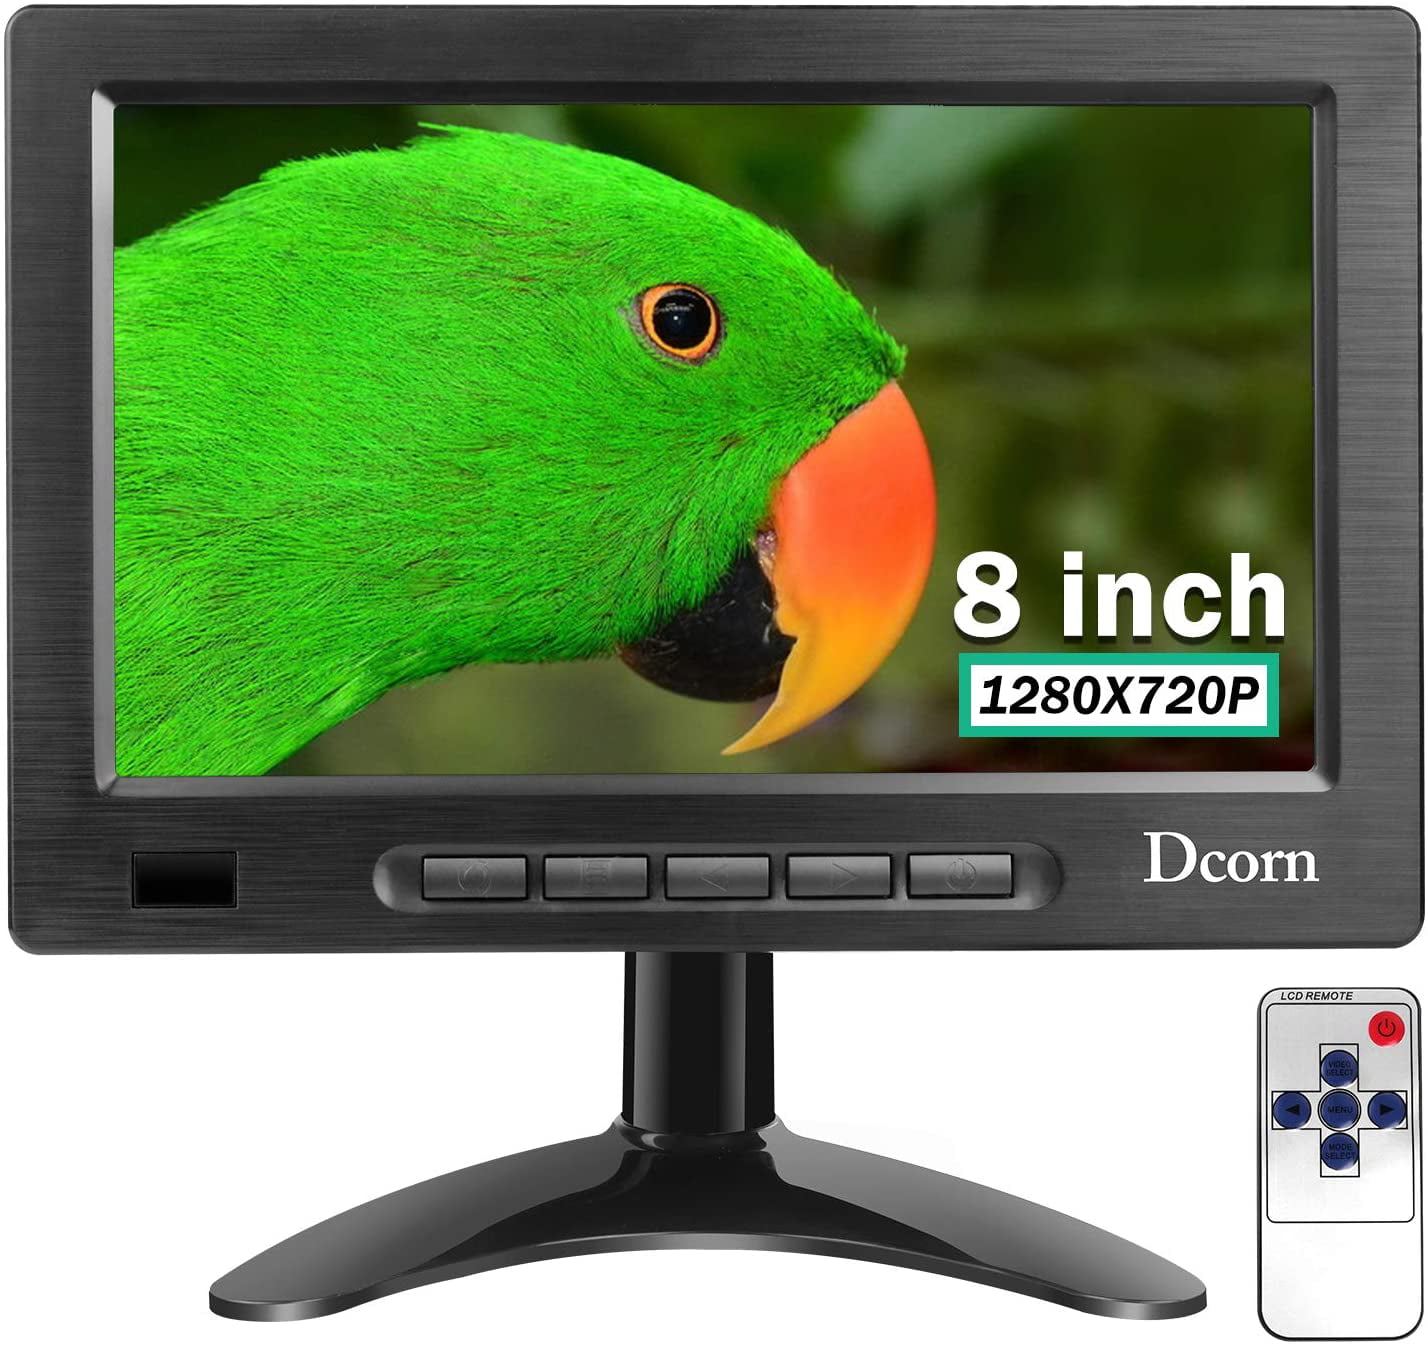 bytte rundt fire gange Foragt SKYSONIC 8 Inch Mini Monitor,Small HDMI Monitor 1280x720 16:9 IPS Metal  Housing Computer Monitor Support HDMI/VGA/AV/BNC Input with Wall  Bracket&Remote Control,178 Full Viewing w/Speaker - Walmart.com